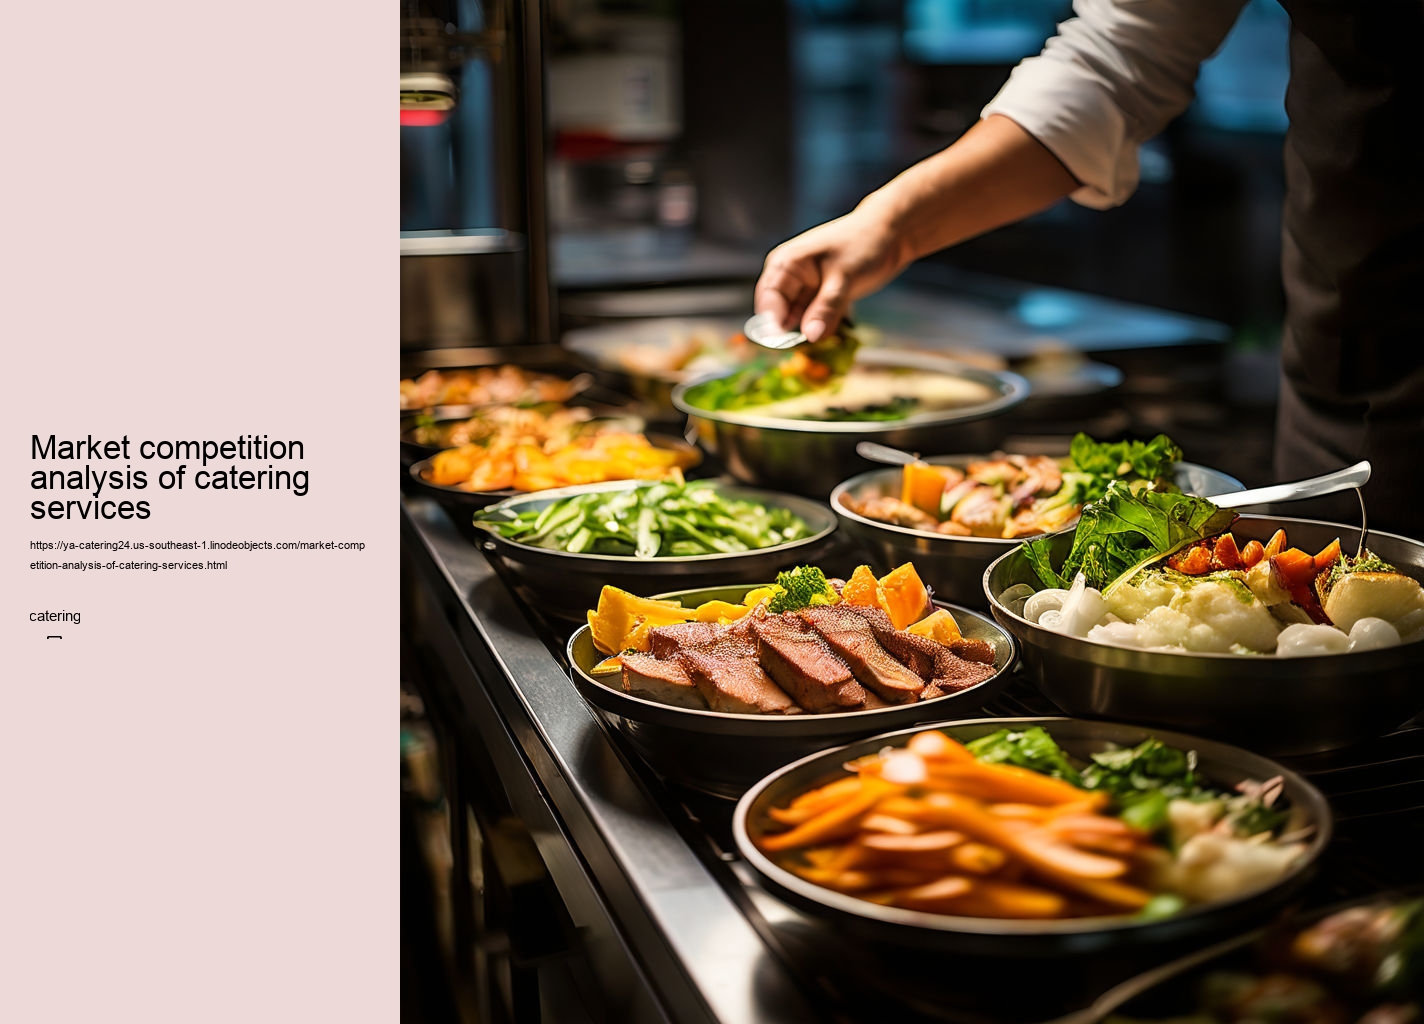 Market competition analysis of catering services